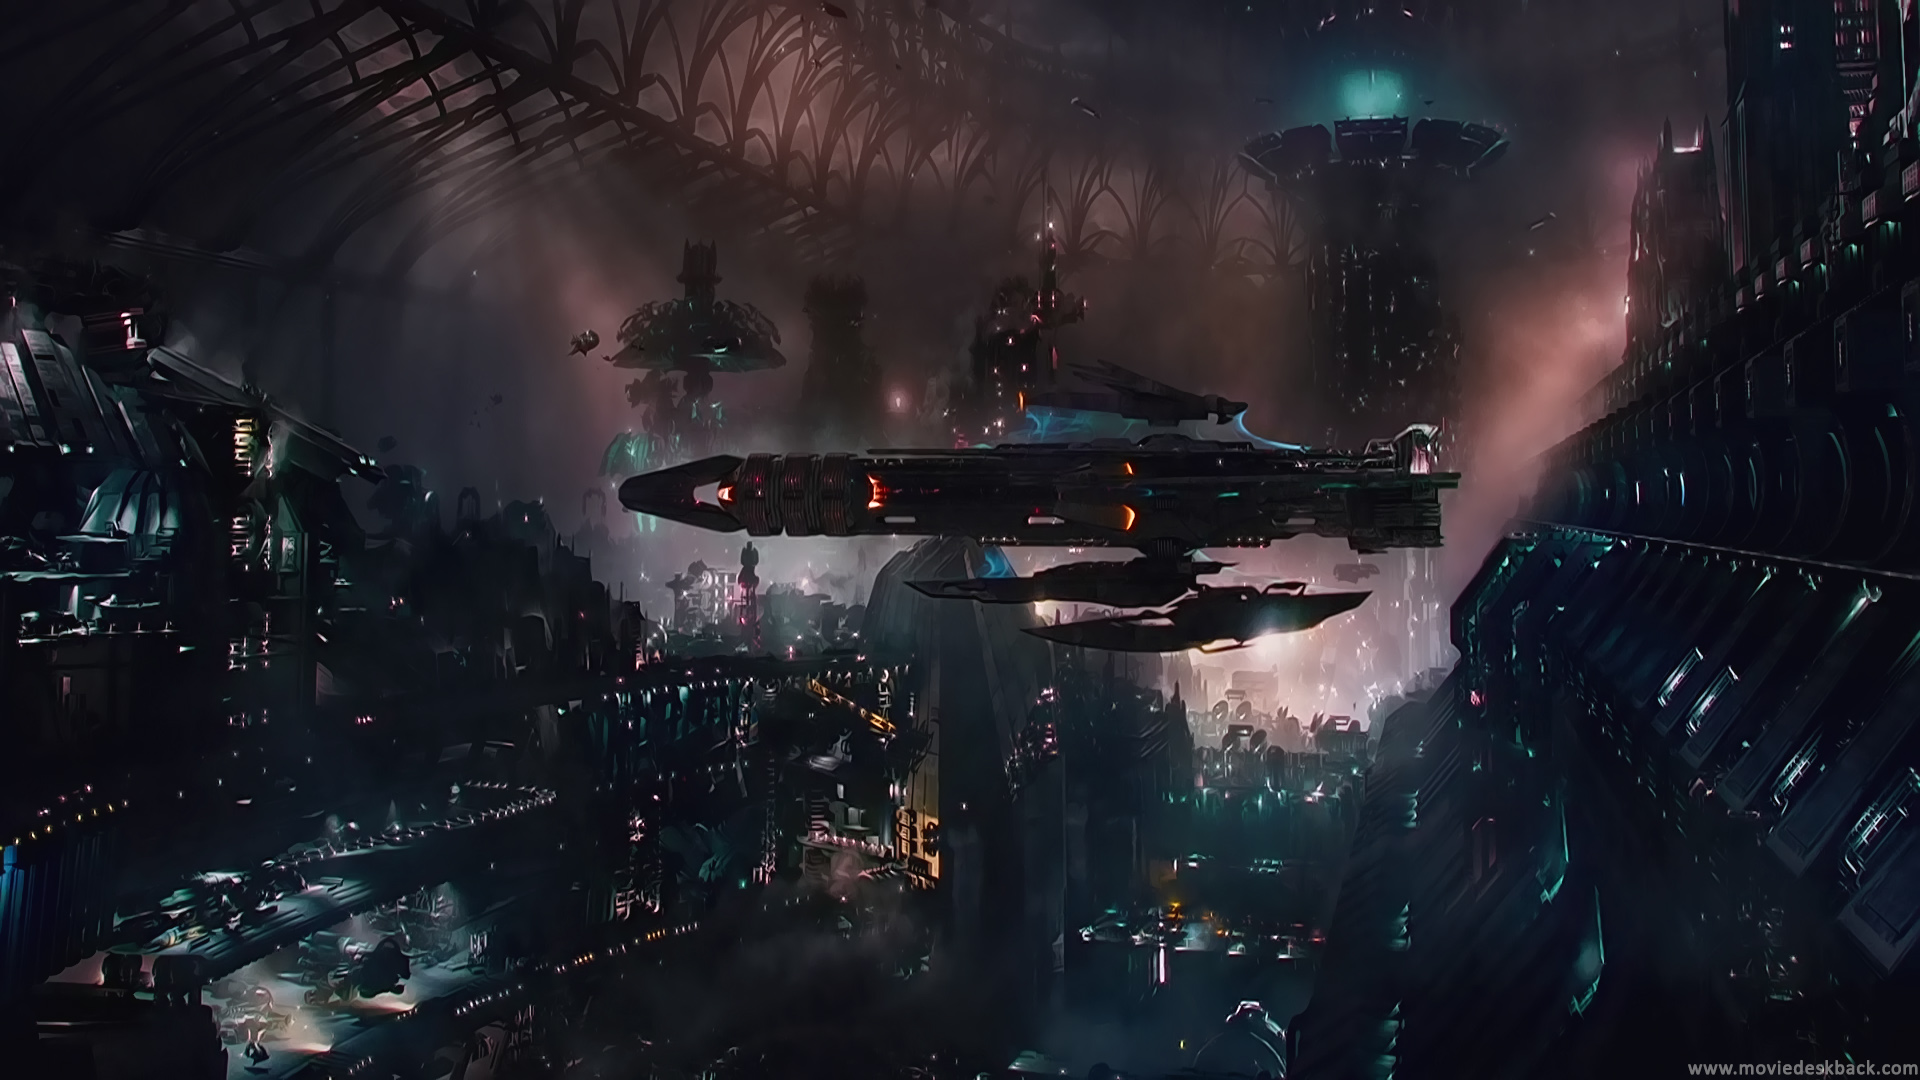 HD wallpaper featuring a sci-fi cityscape from Jupiter Ascending with futuristic ships and towering structures.